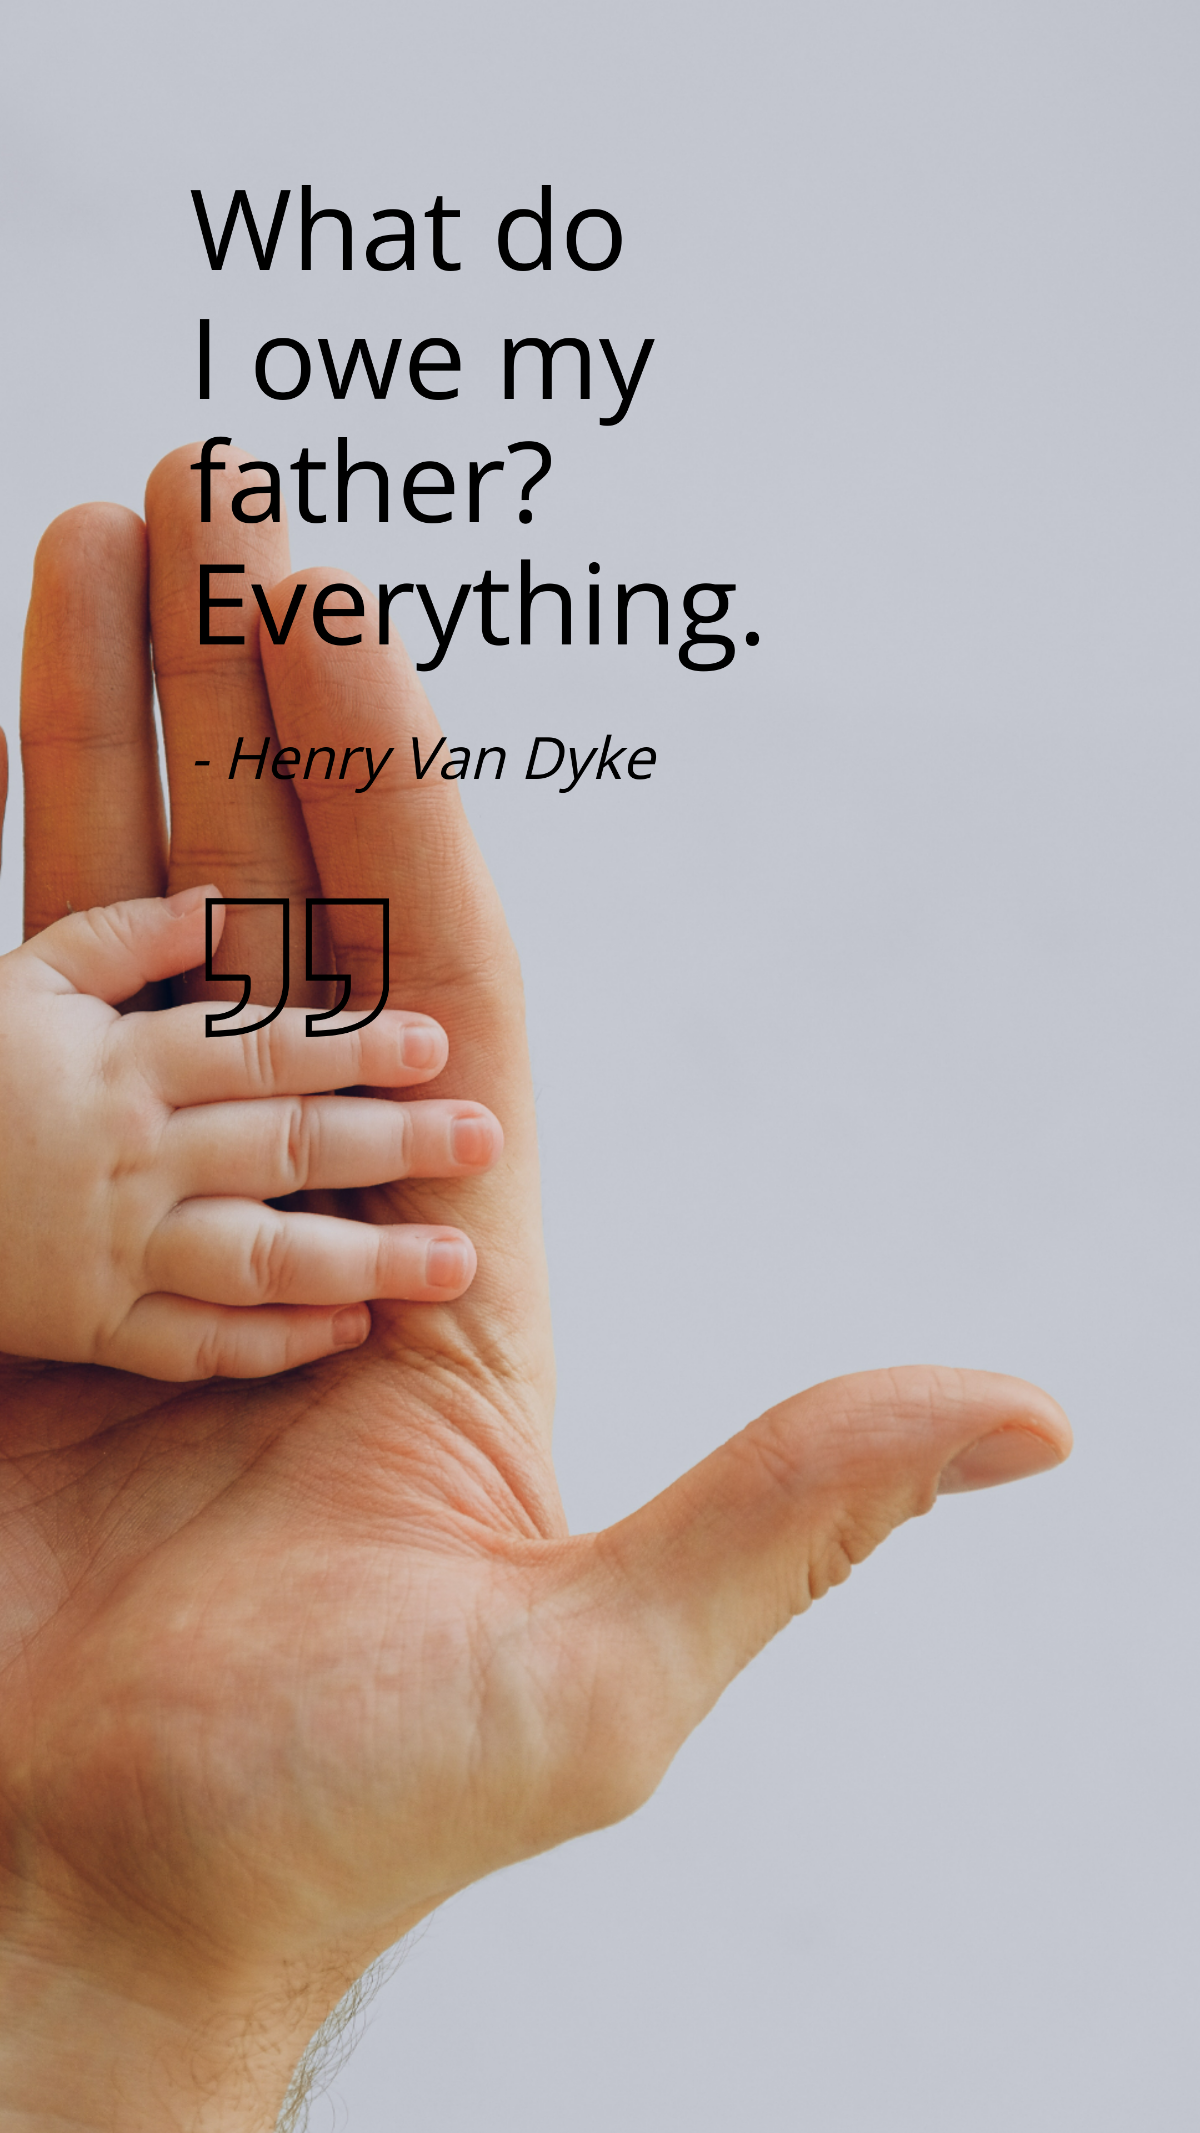 Henry Van Dyke - What do I owe my father? Everything. Template